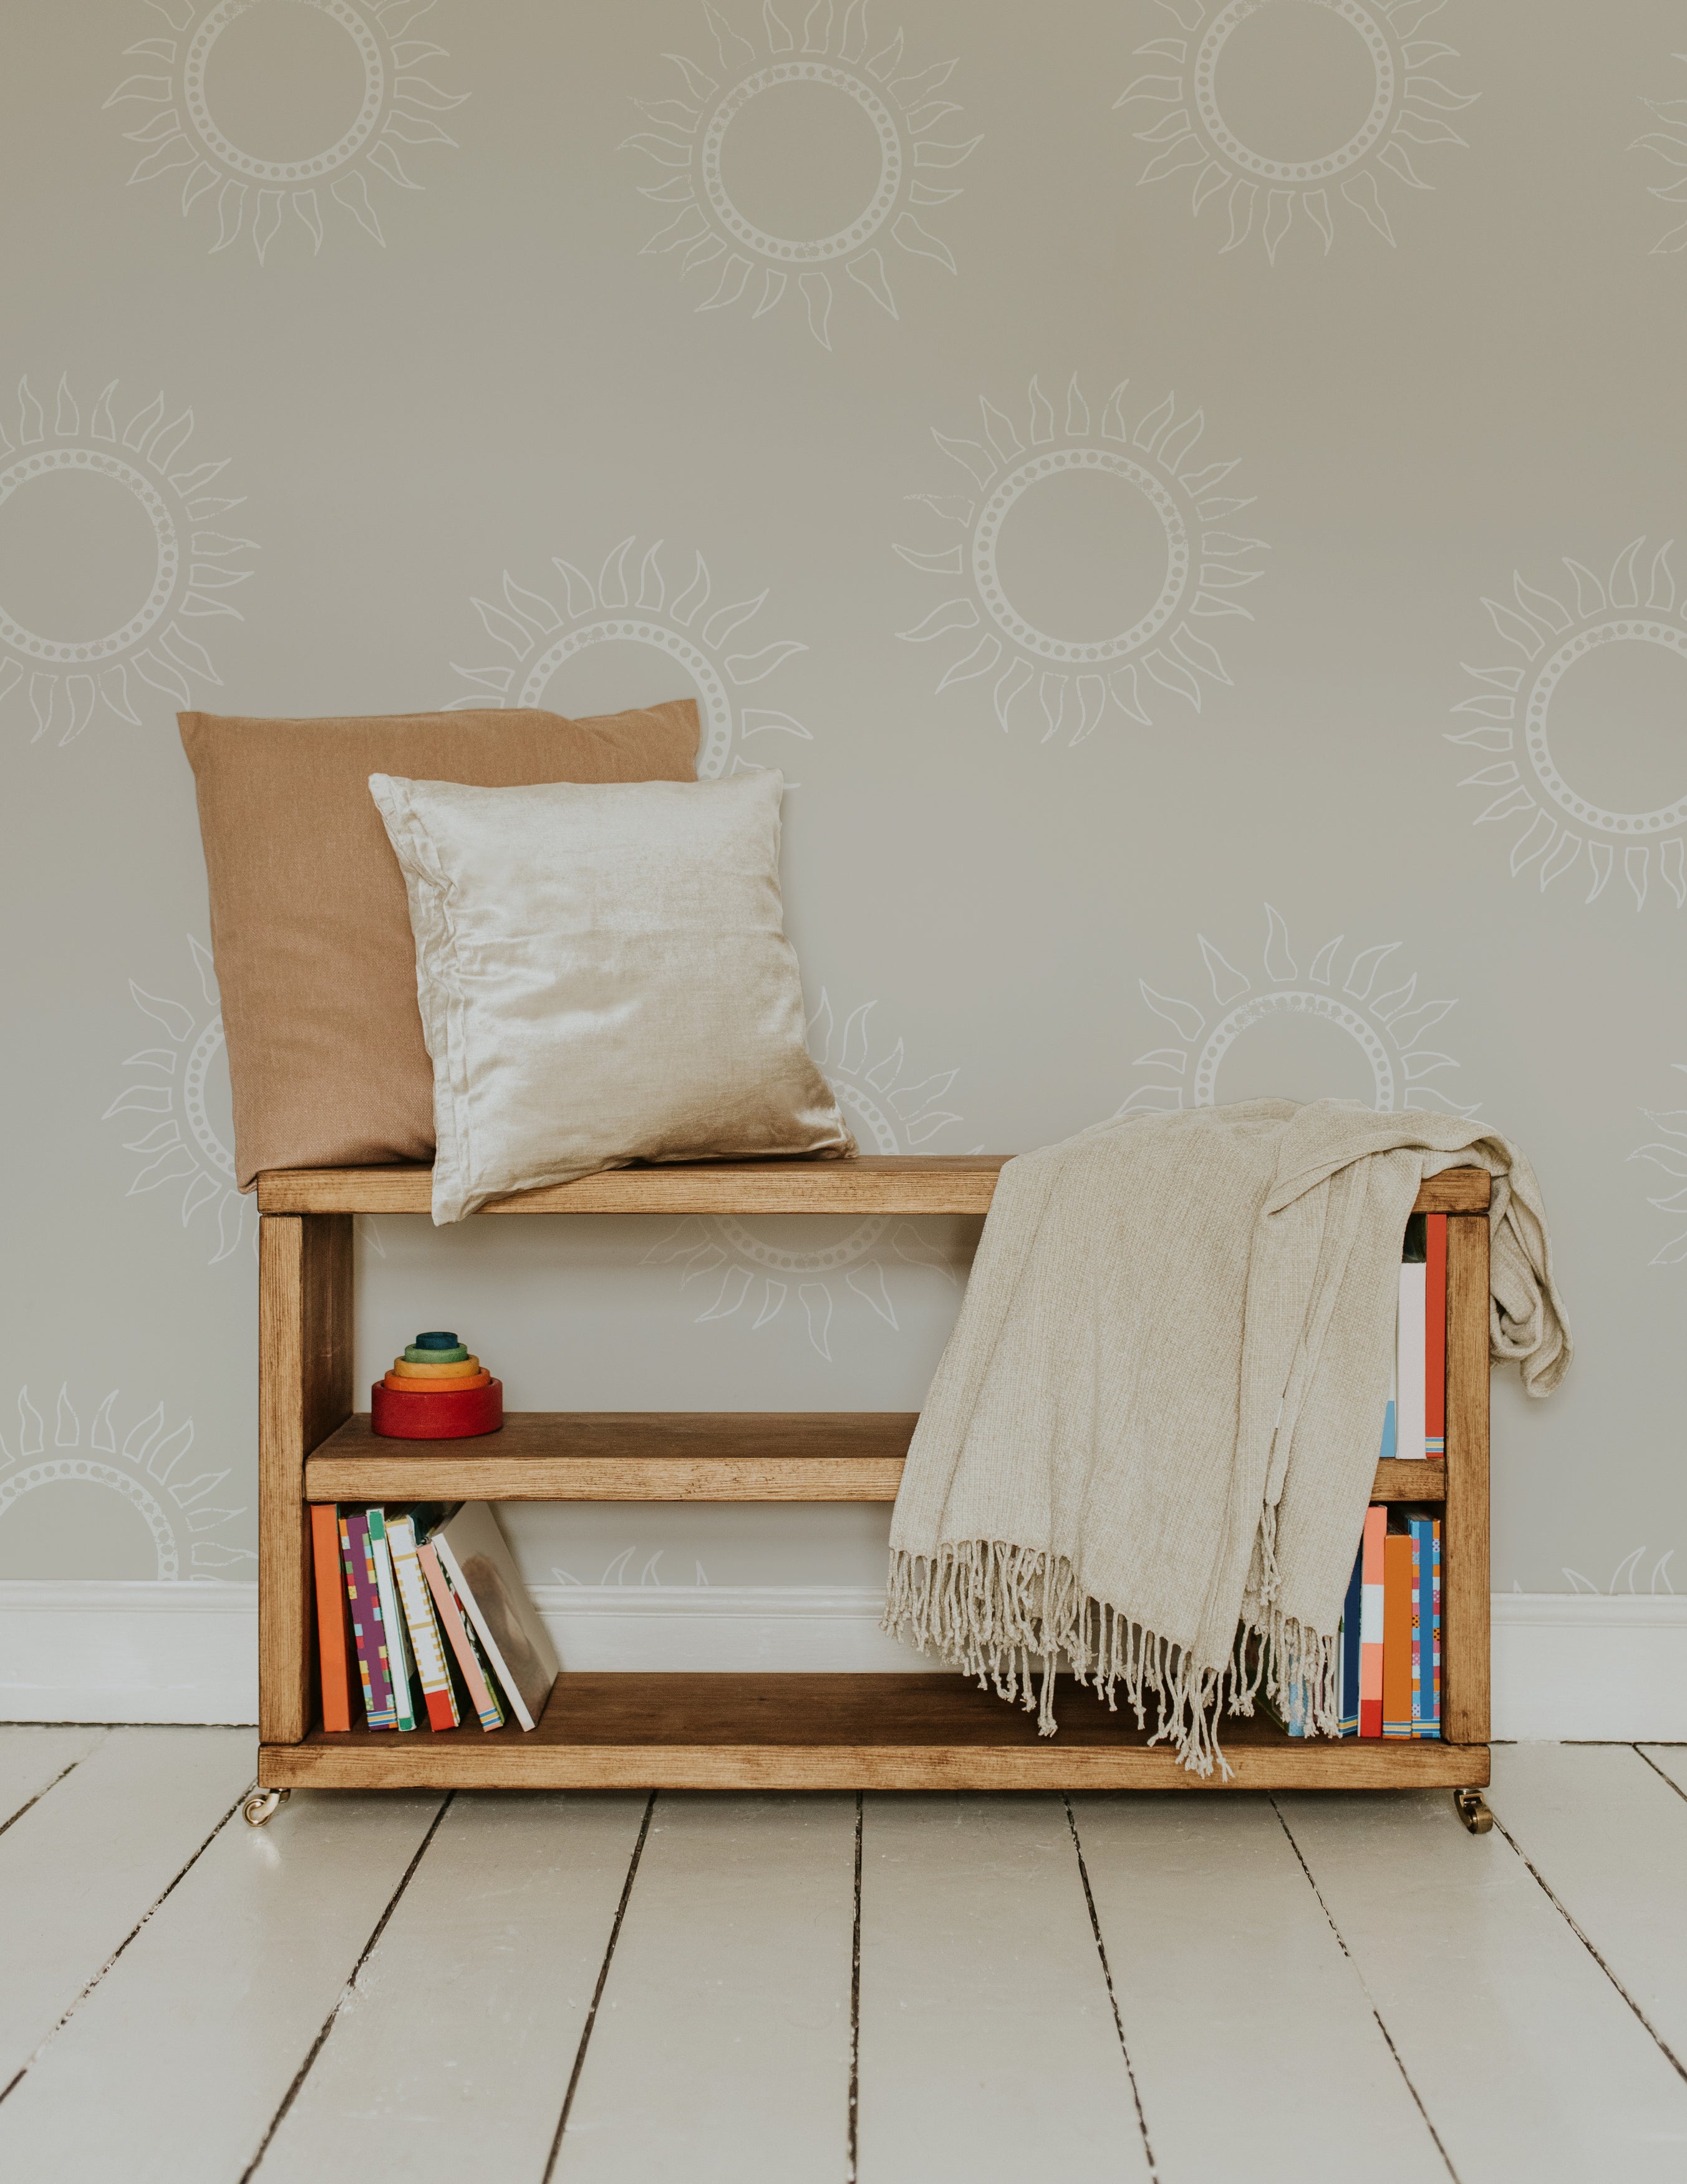  A cozy corner with the Sunburst Harmony Wallpaper on the wall, featuring the white sunburst pattern on a warm beige background. A wooden bench with pillows and a blanket is placed against the wall, with books neatly arranged on the lower shelves.